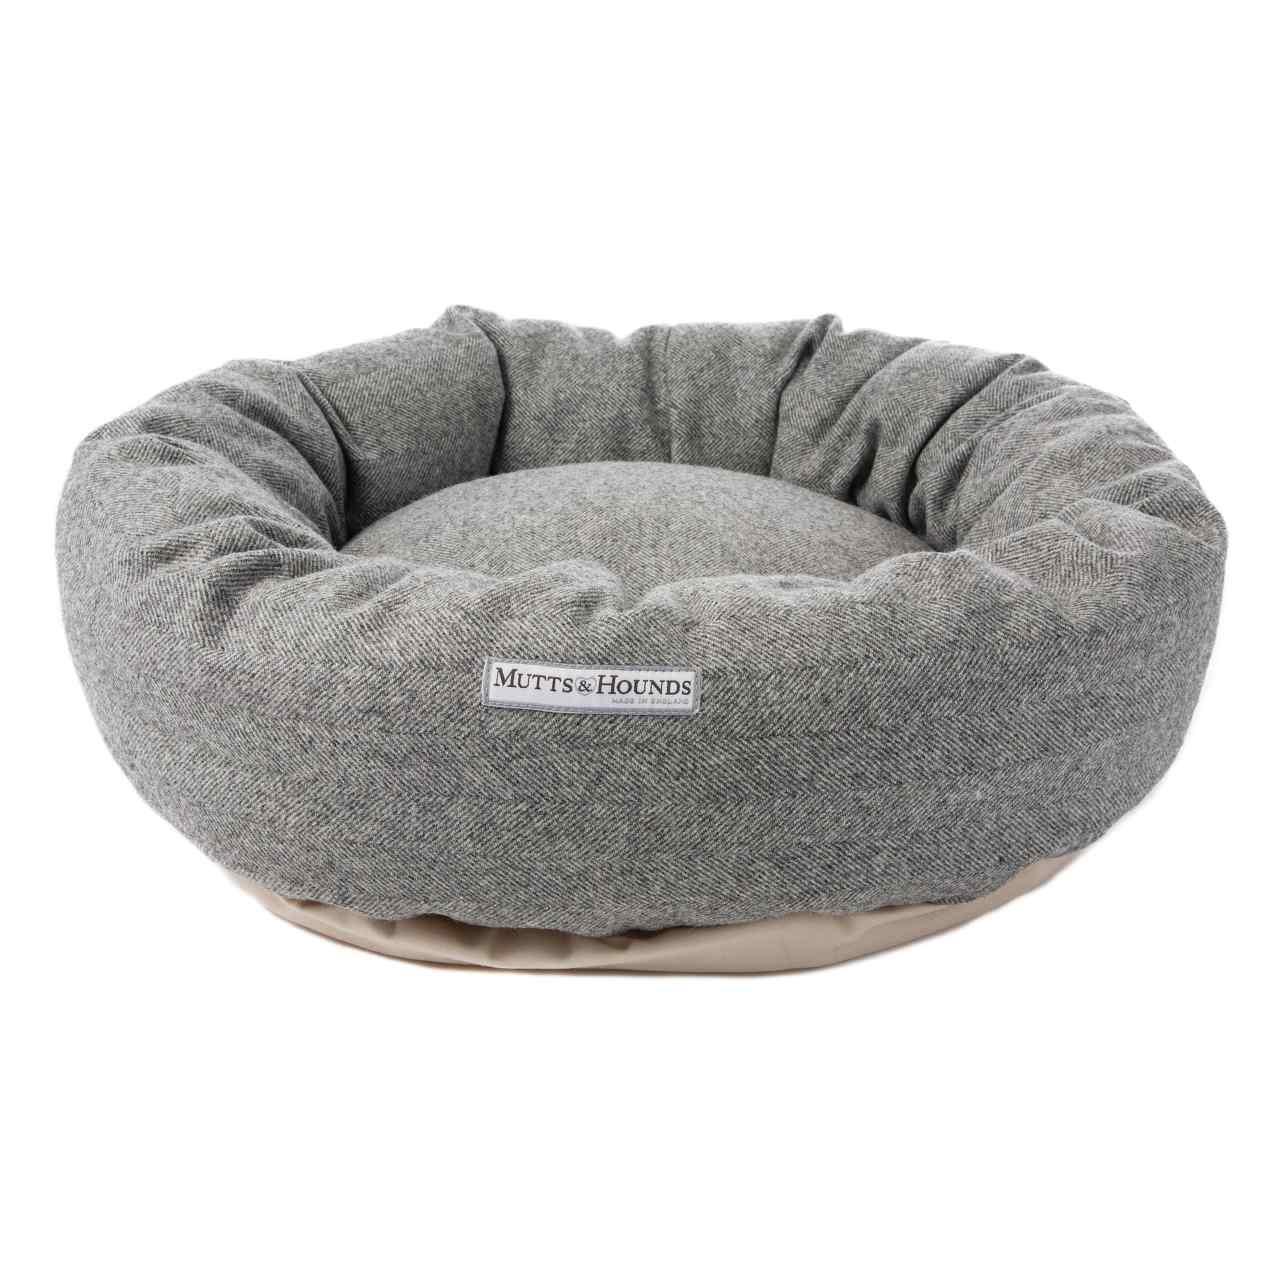 An image of Mutts & Hounds Stoneham Tweed Donut Bed Medium